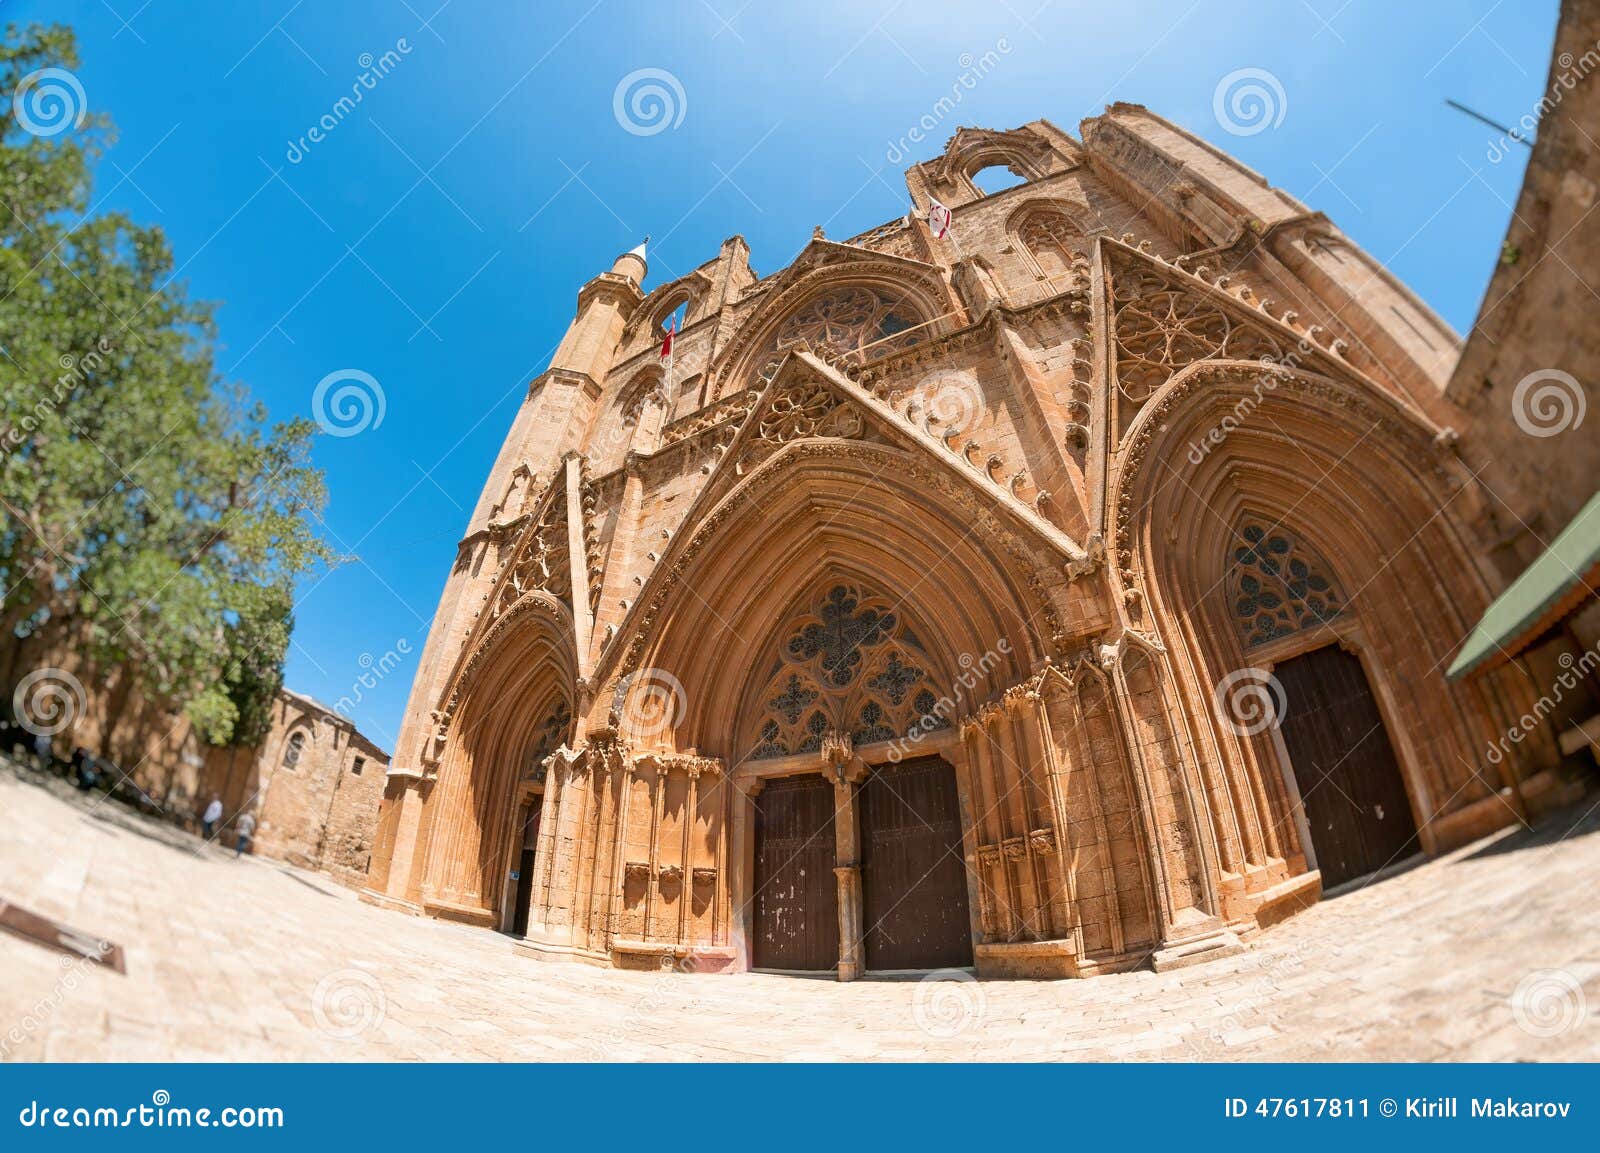 lala mustafa pasha mosque formerly st. nicholas cathedral. famagusta, cyprus